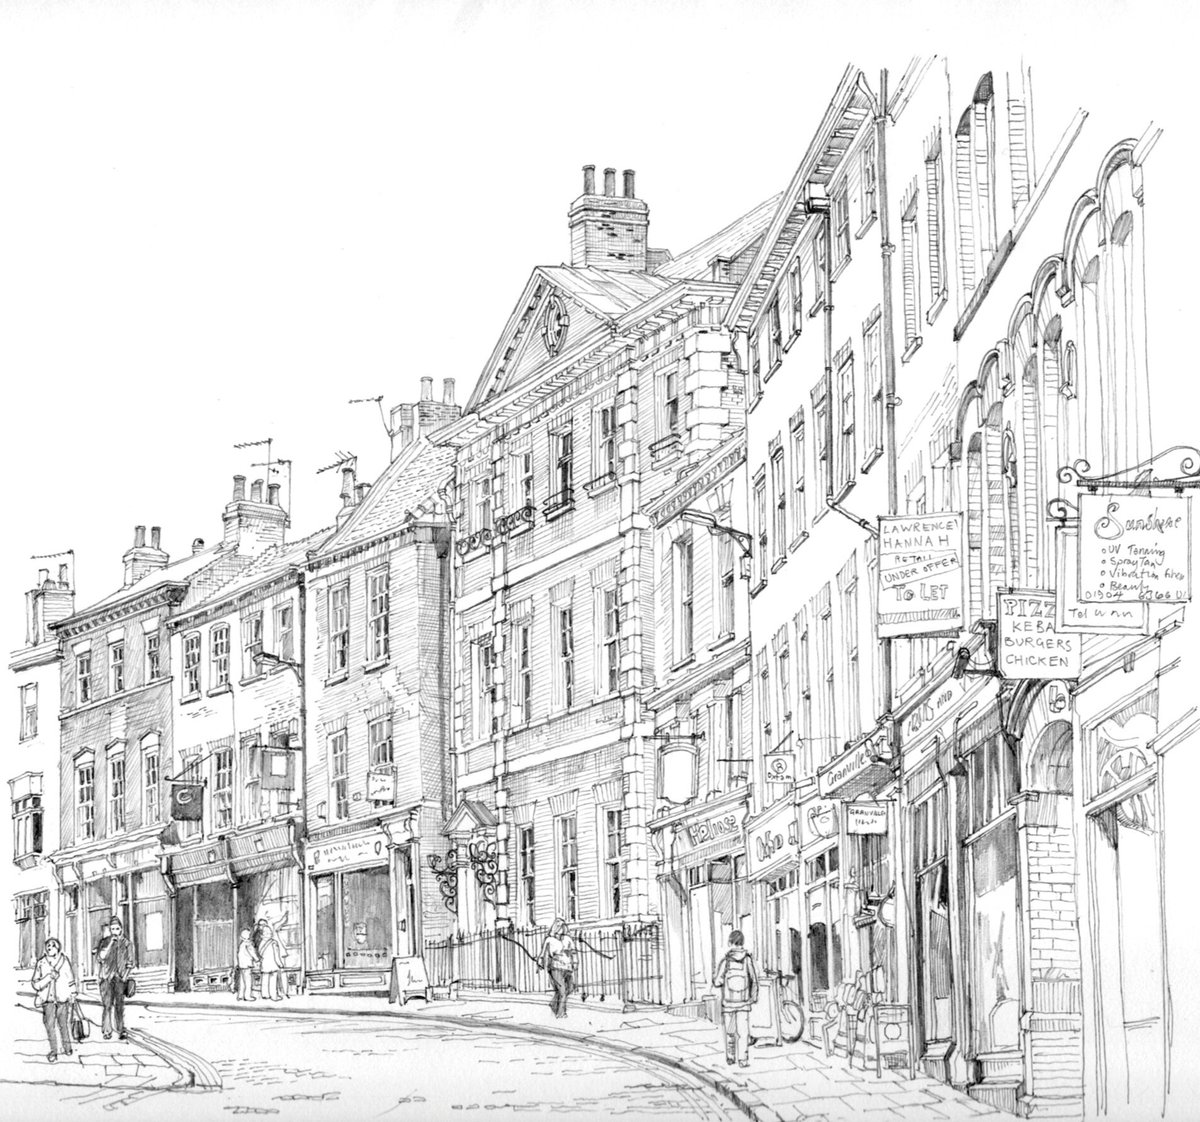 Micklegate, York from the bottom of the hill. In the centre is Garforth House with its ornamental lamp brackets, built in the mid 18th century, possibly designed by John Carr. 

@Serlianna @Davidjsalter @yorkcivictrust #pencil #drawing